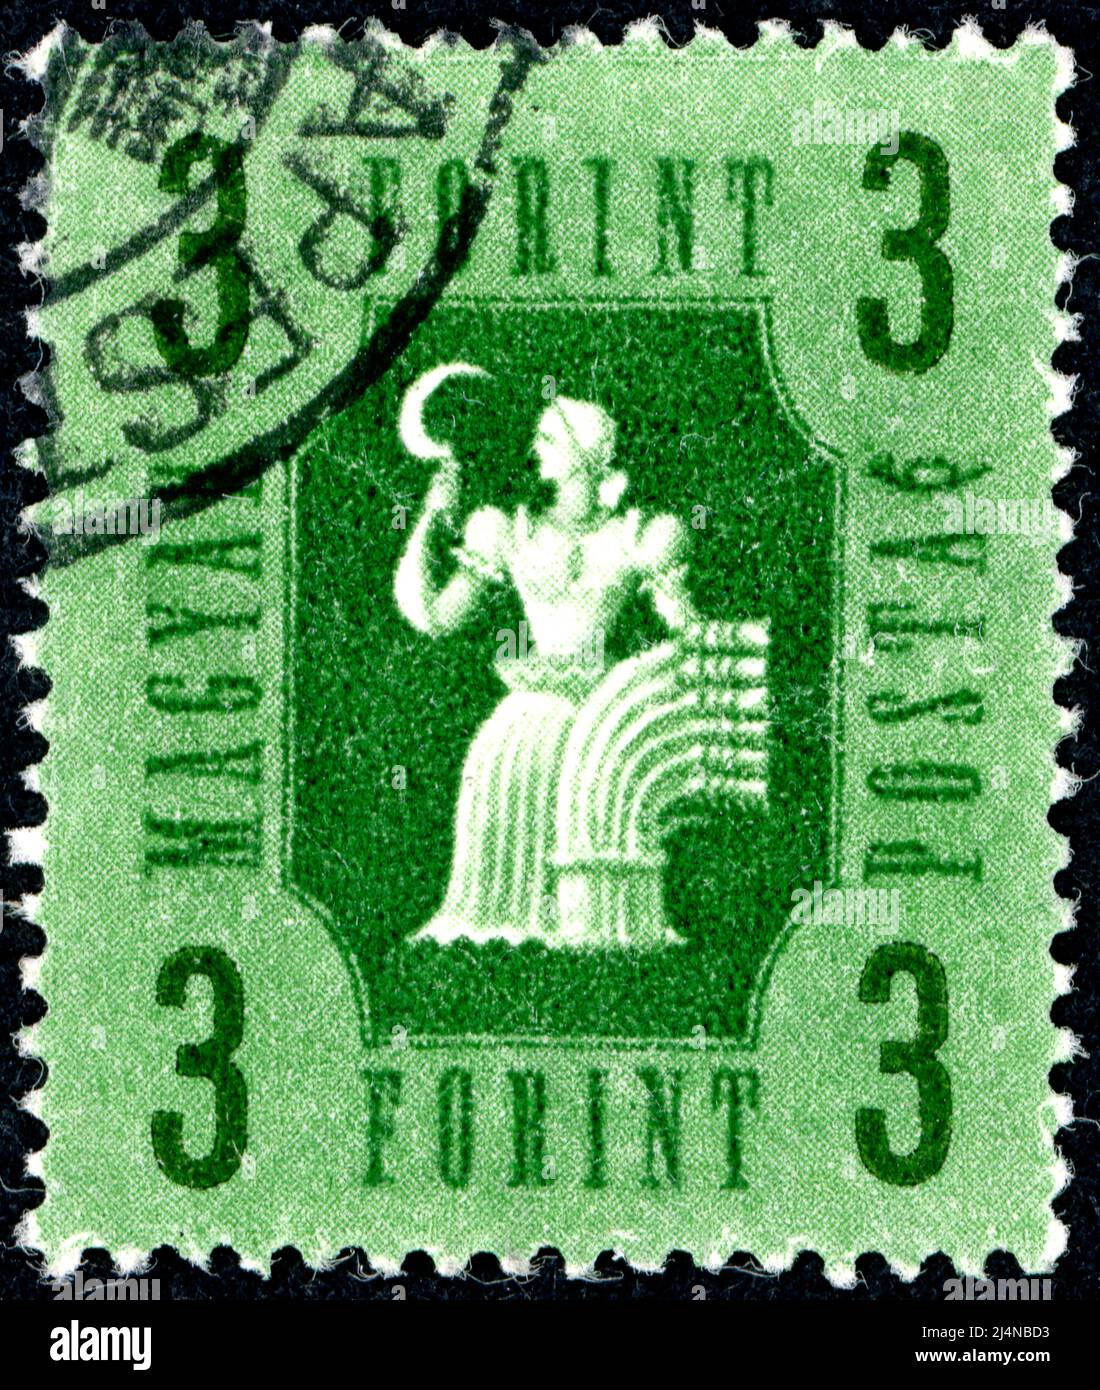 HUNGARY - CIRCA 1946: A stamp printed in Hungary, depicts a woman with a sickle, the symbol of agriculture, circa 1946 Stock Photo